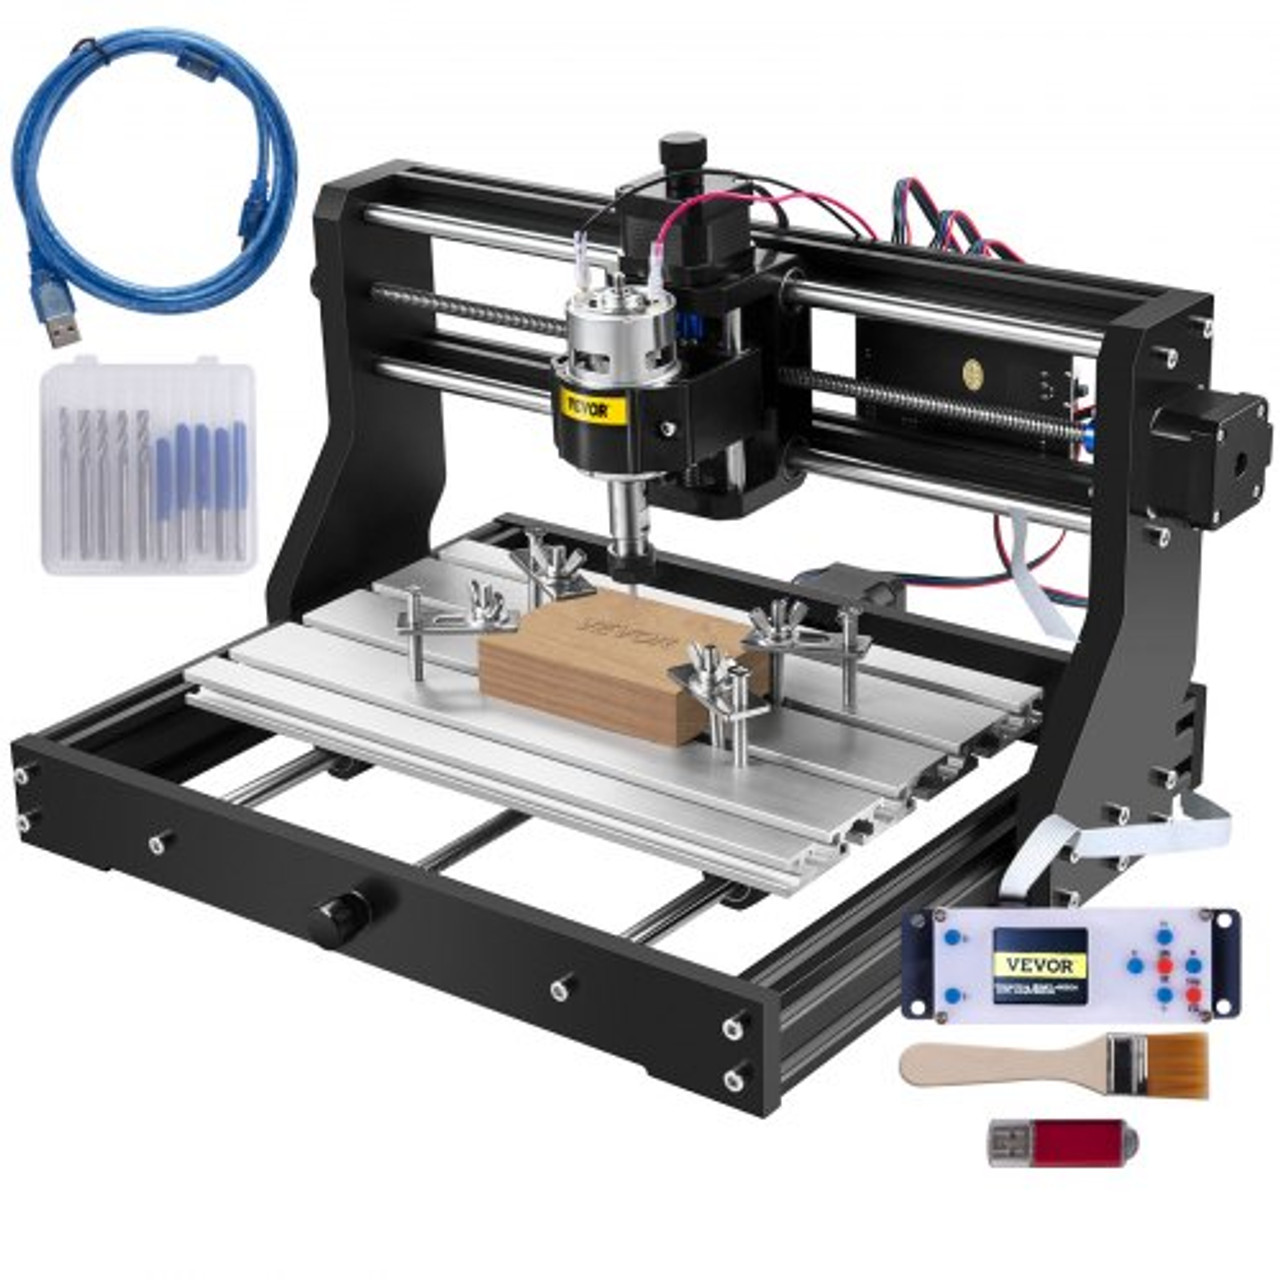 CNC 3018-PRO Router Machine 3 Axis GRBL Control with Offline Controller Plastic Acrylic PCB PVC Wood Carving Milling Engraving Machine XYZ Working Area 300x180x45mm